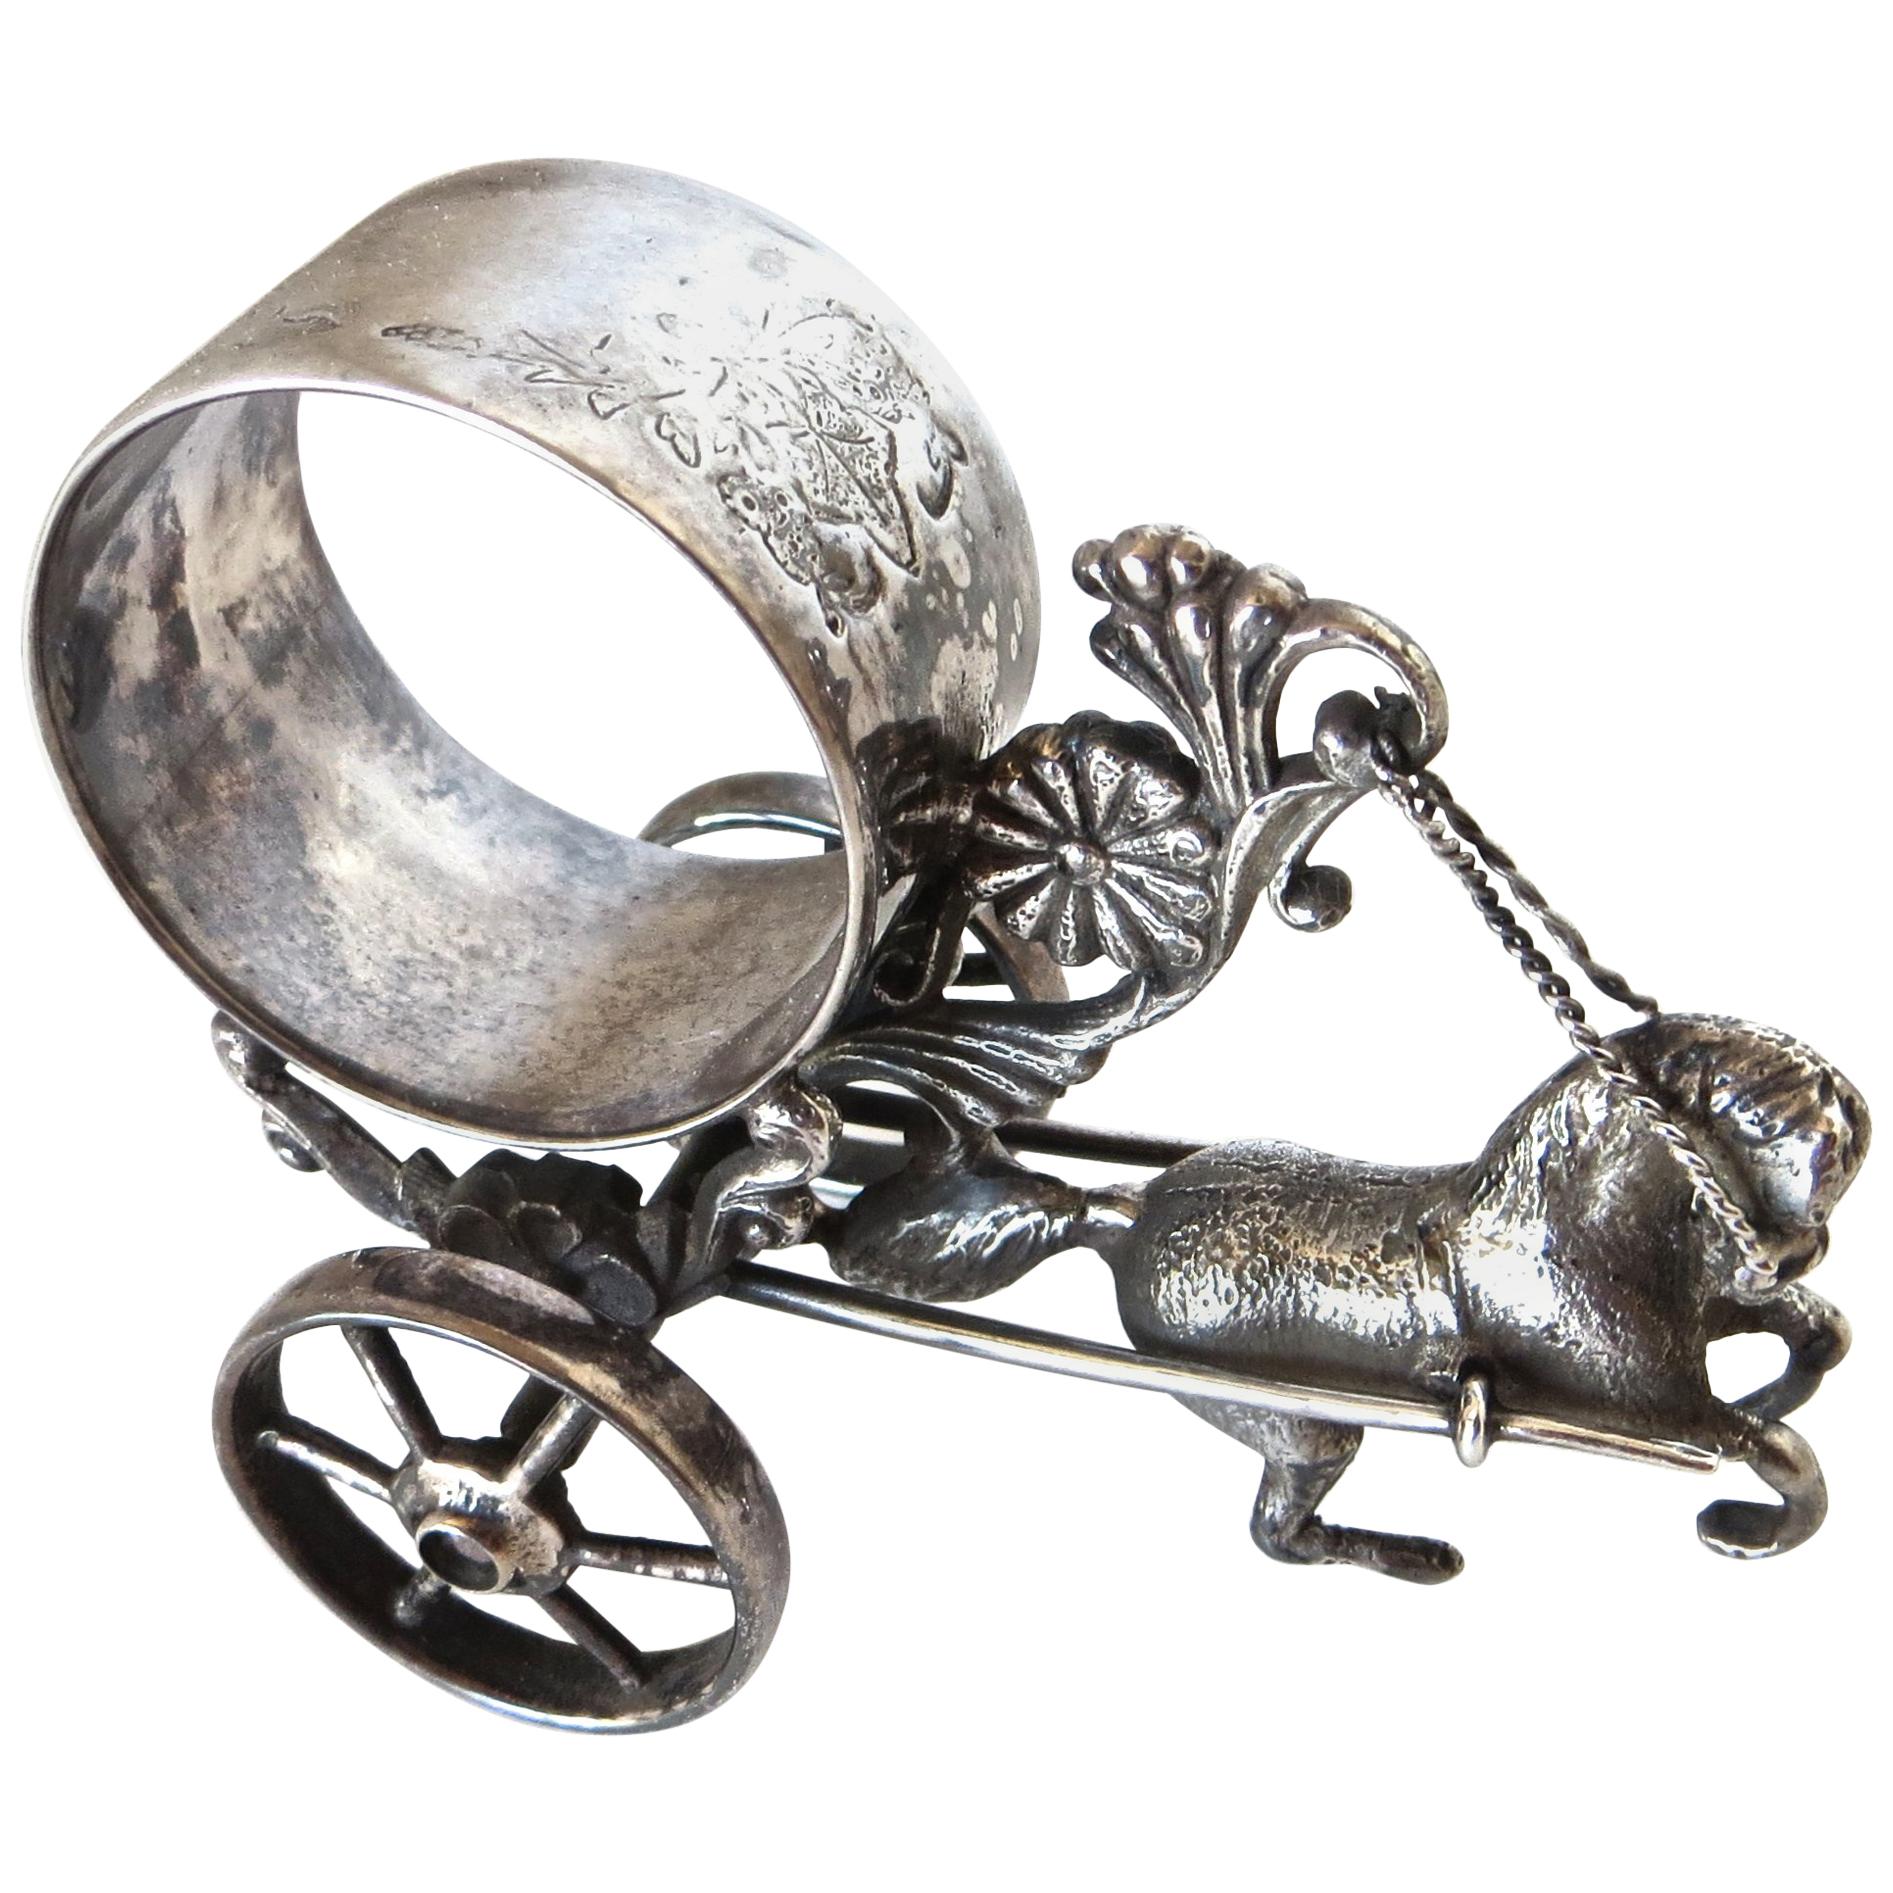 Horse Drawn Silver Plated Figural Napkin Ring on Wheels. American, circa 1885